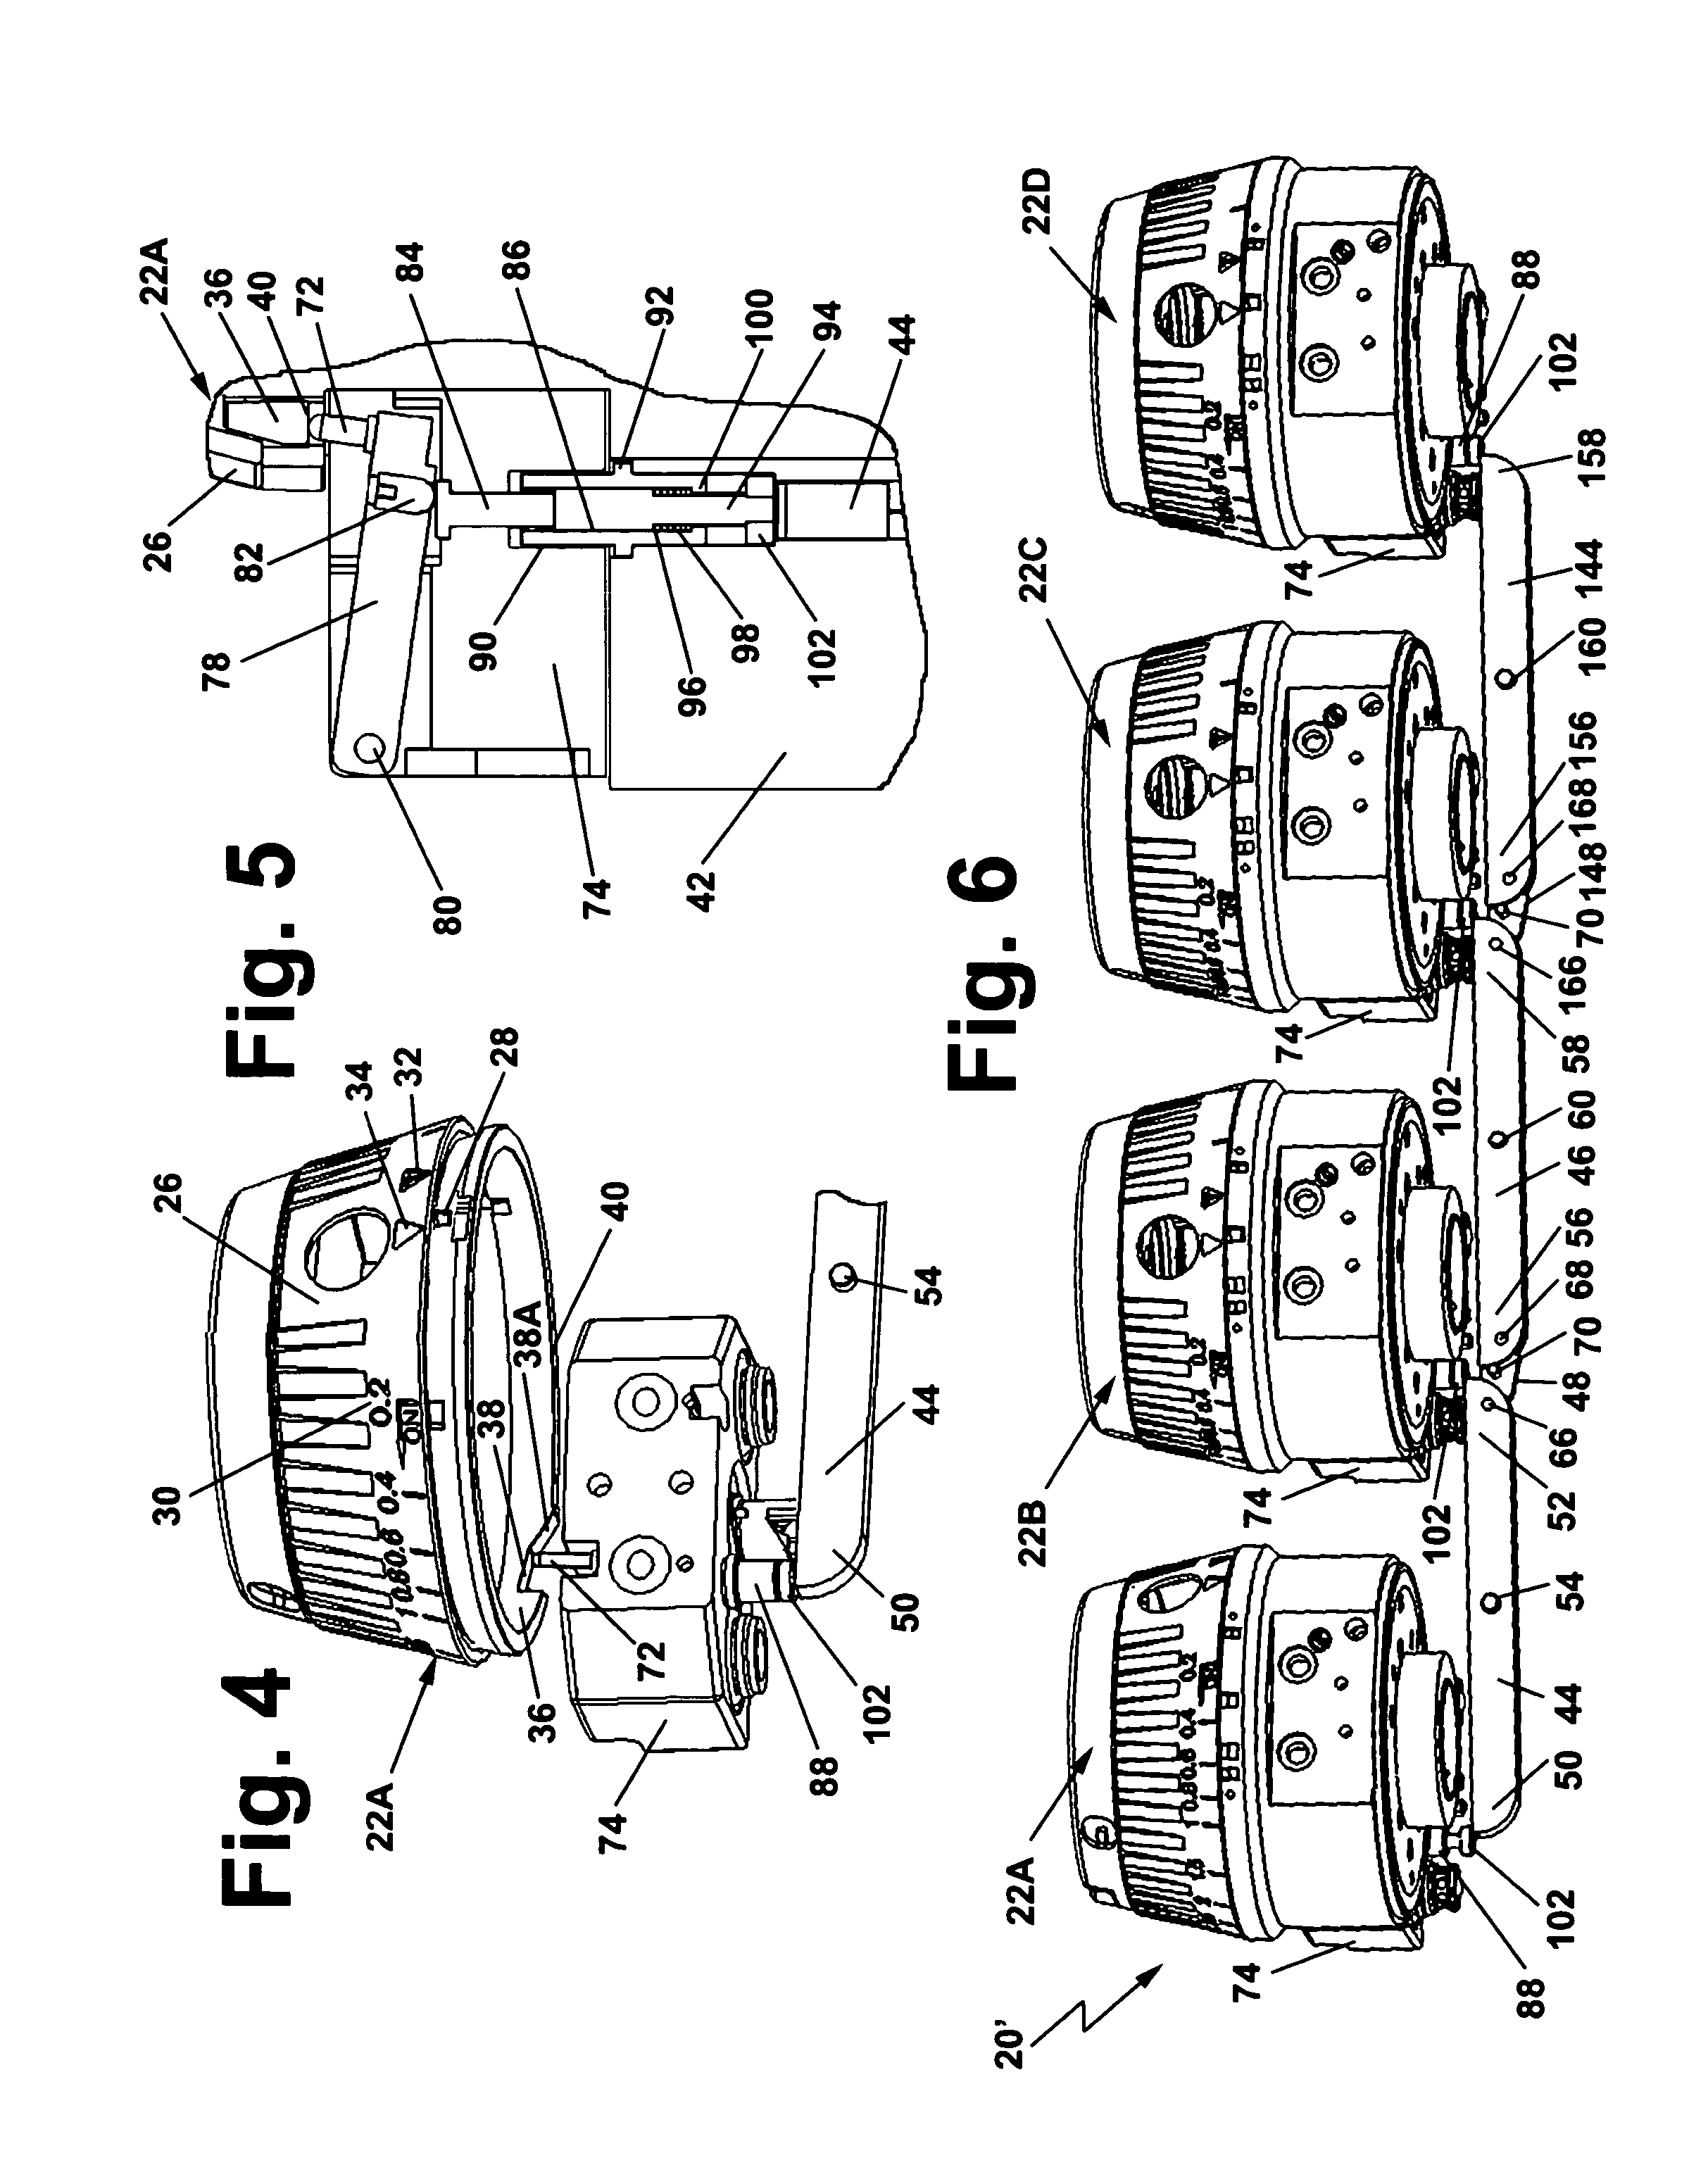 Interlock/exclusion systems for multiple vaporizer anesthesia machines